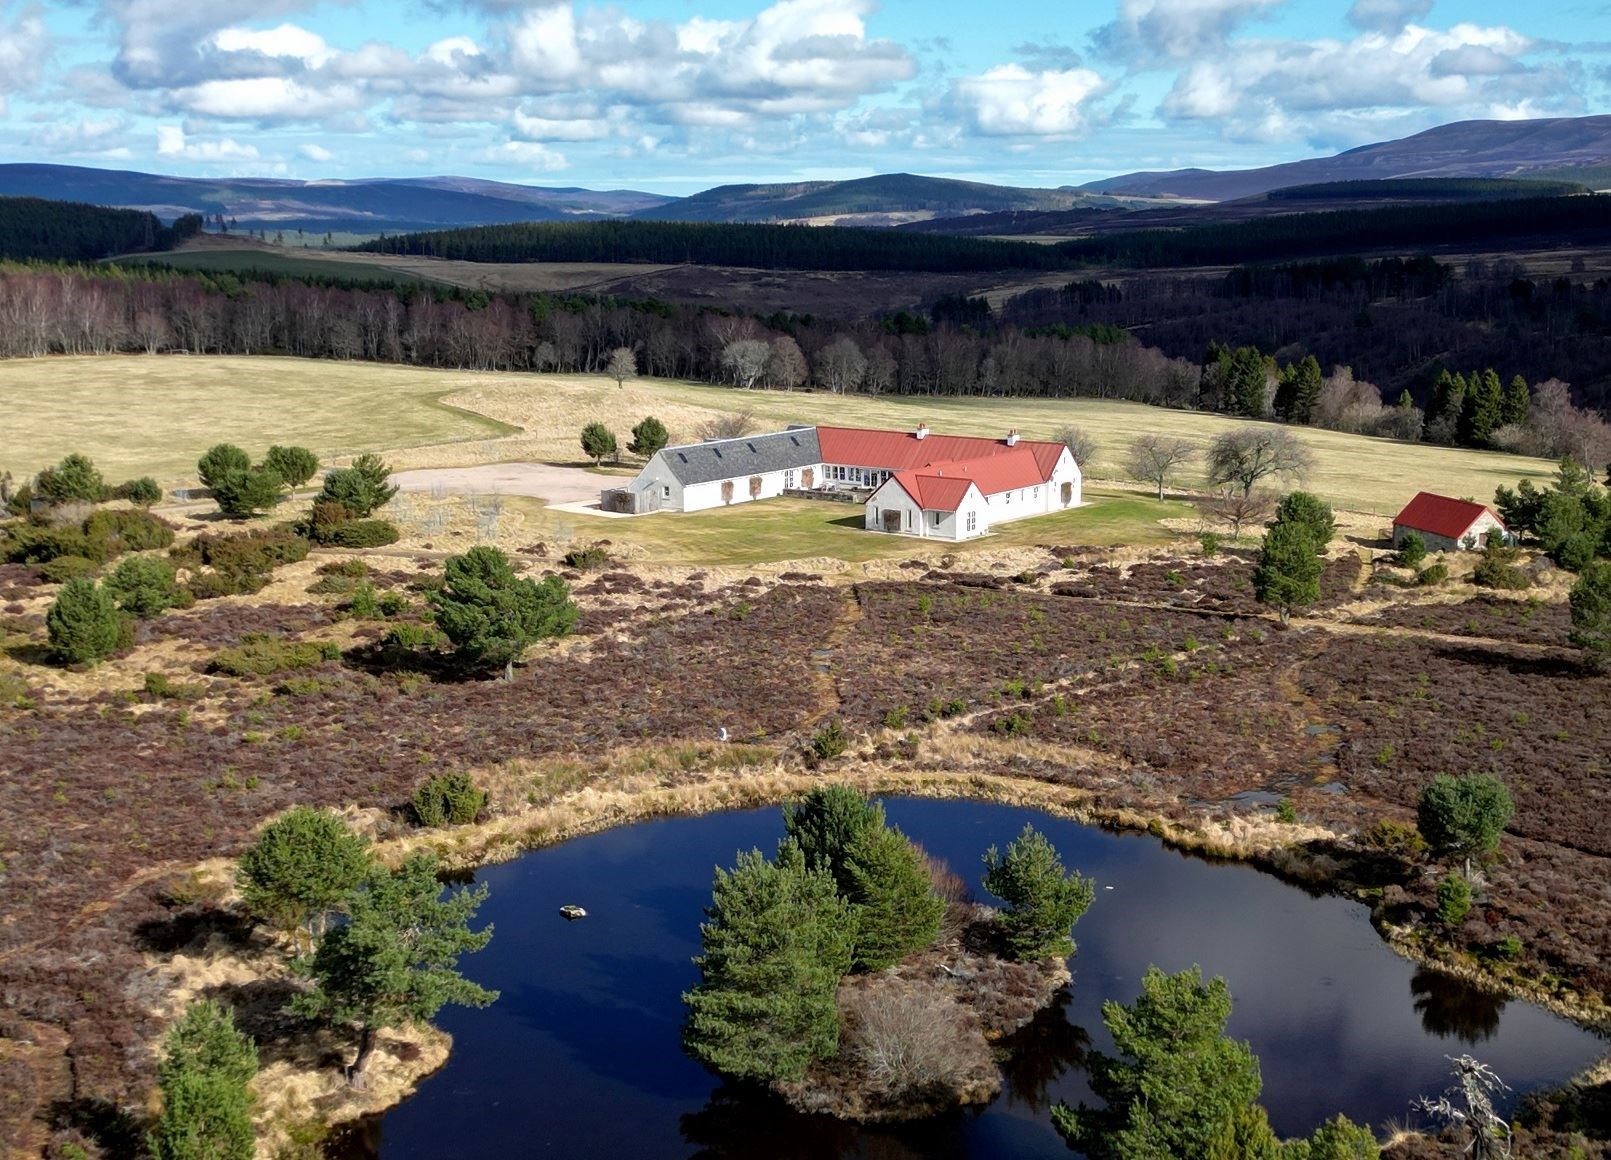 Backharn is set in stunning grounds which include the property's own lochan.